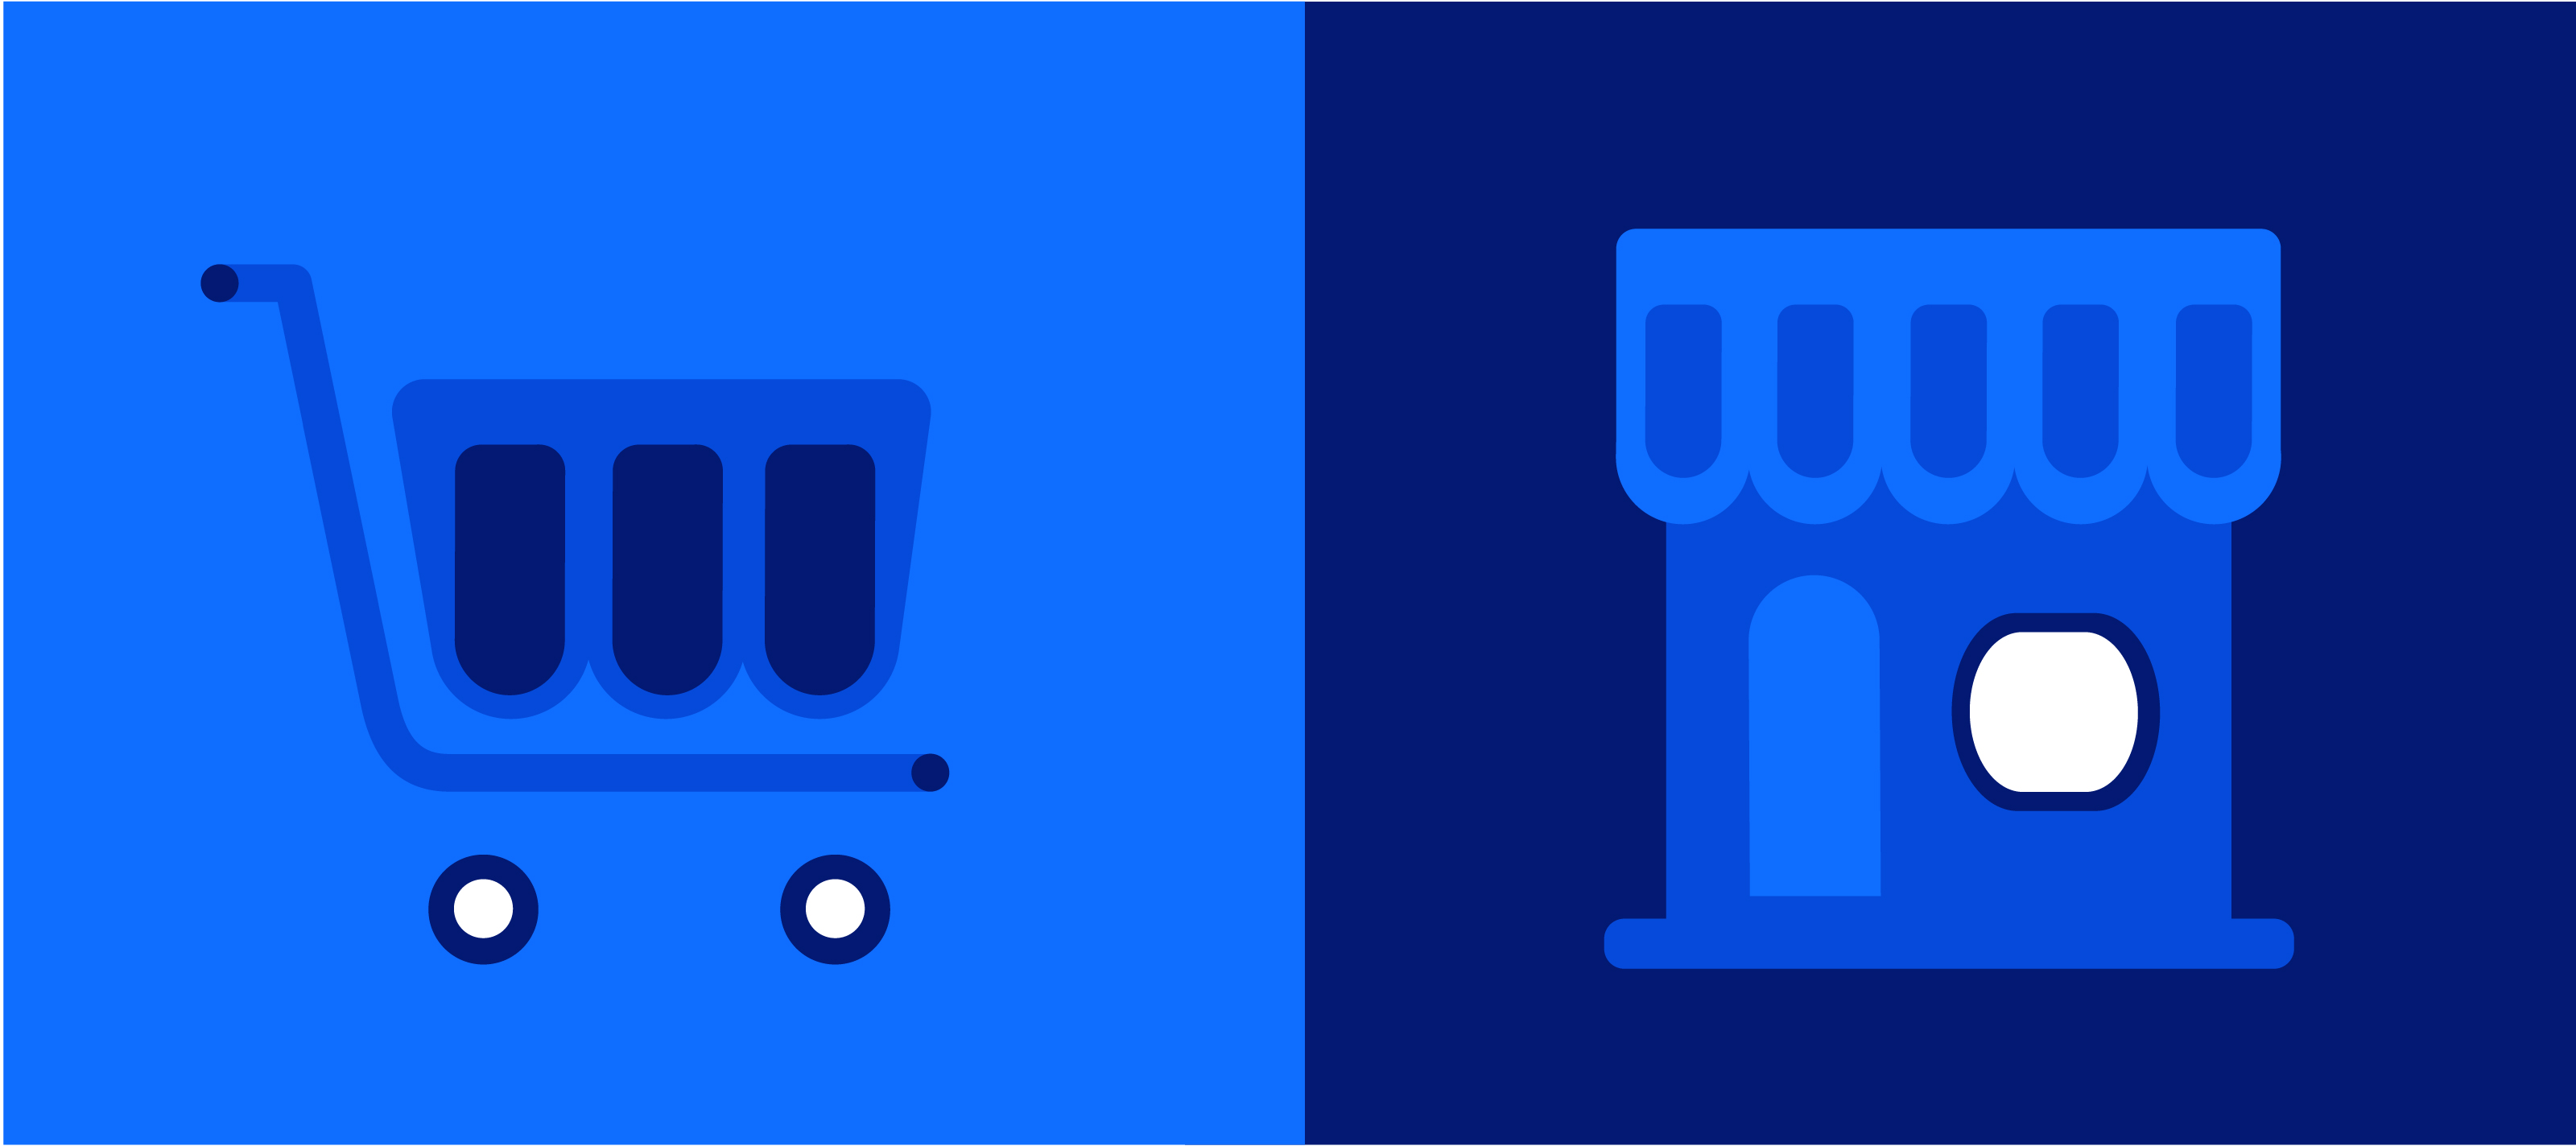 Shopping cart and storefront illustrations